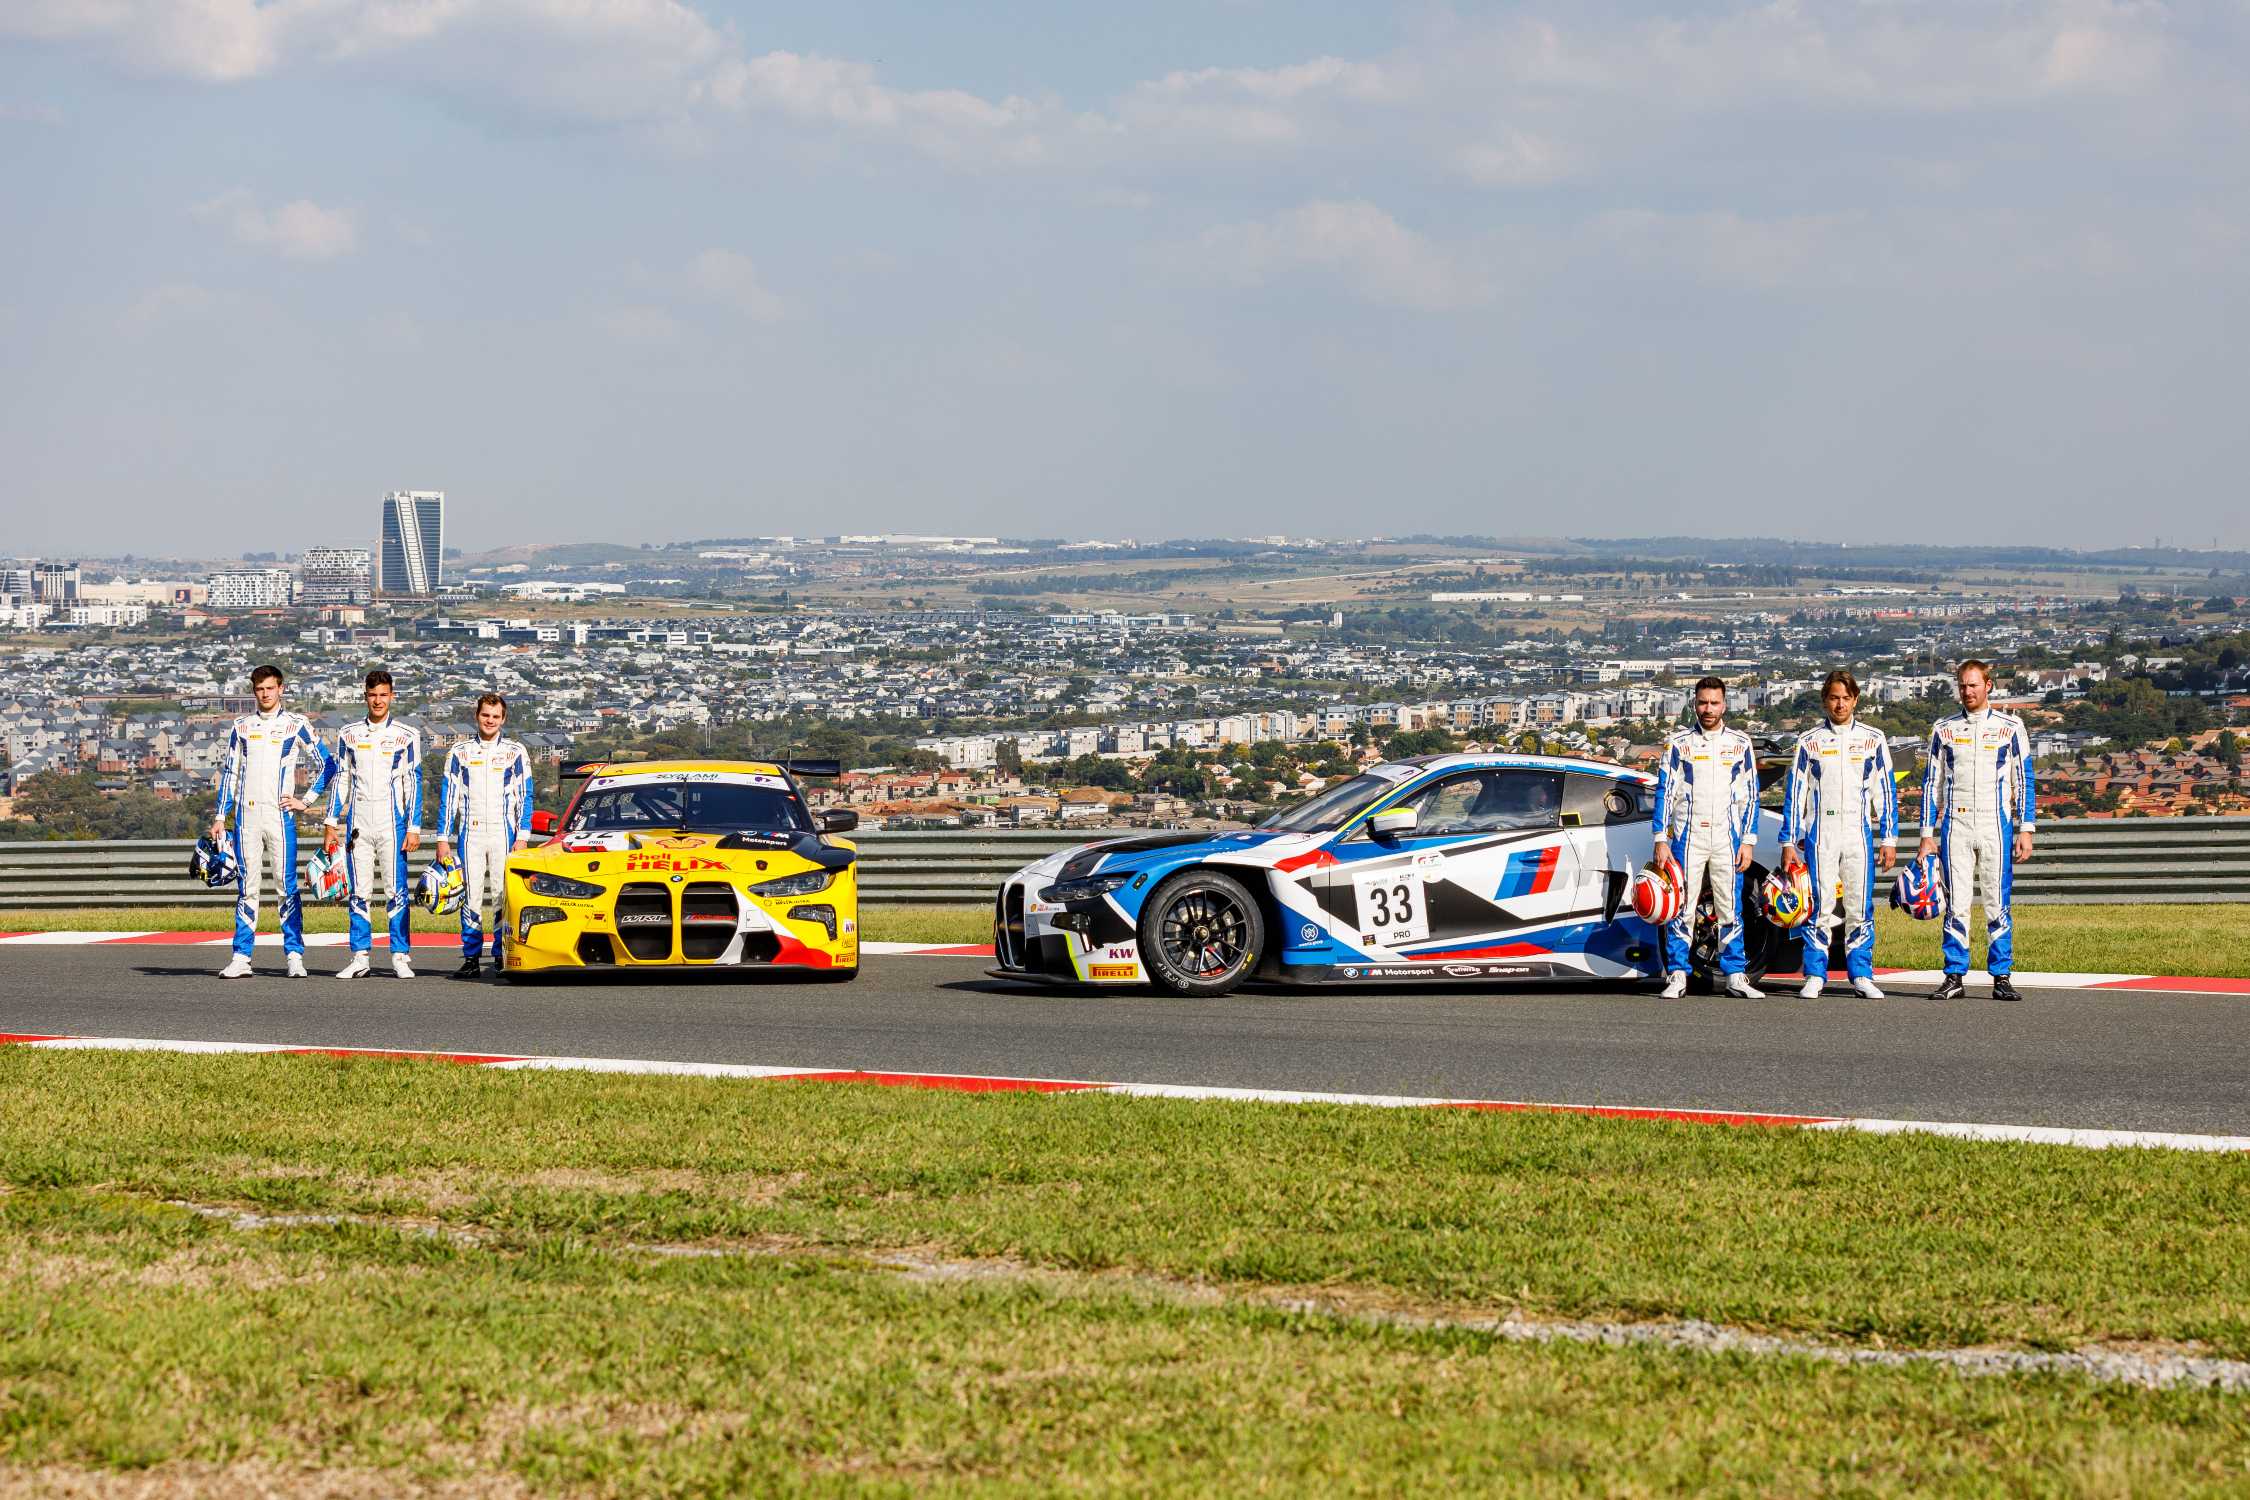 Intercontinental GT Challenge: BMW M Team WRT competes with two BMW M4 GT3s at the Indianapolis 8 Hour.